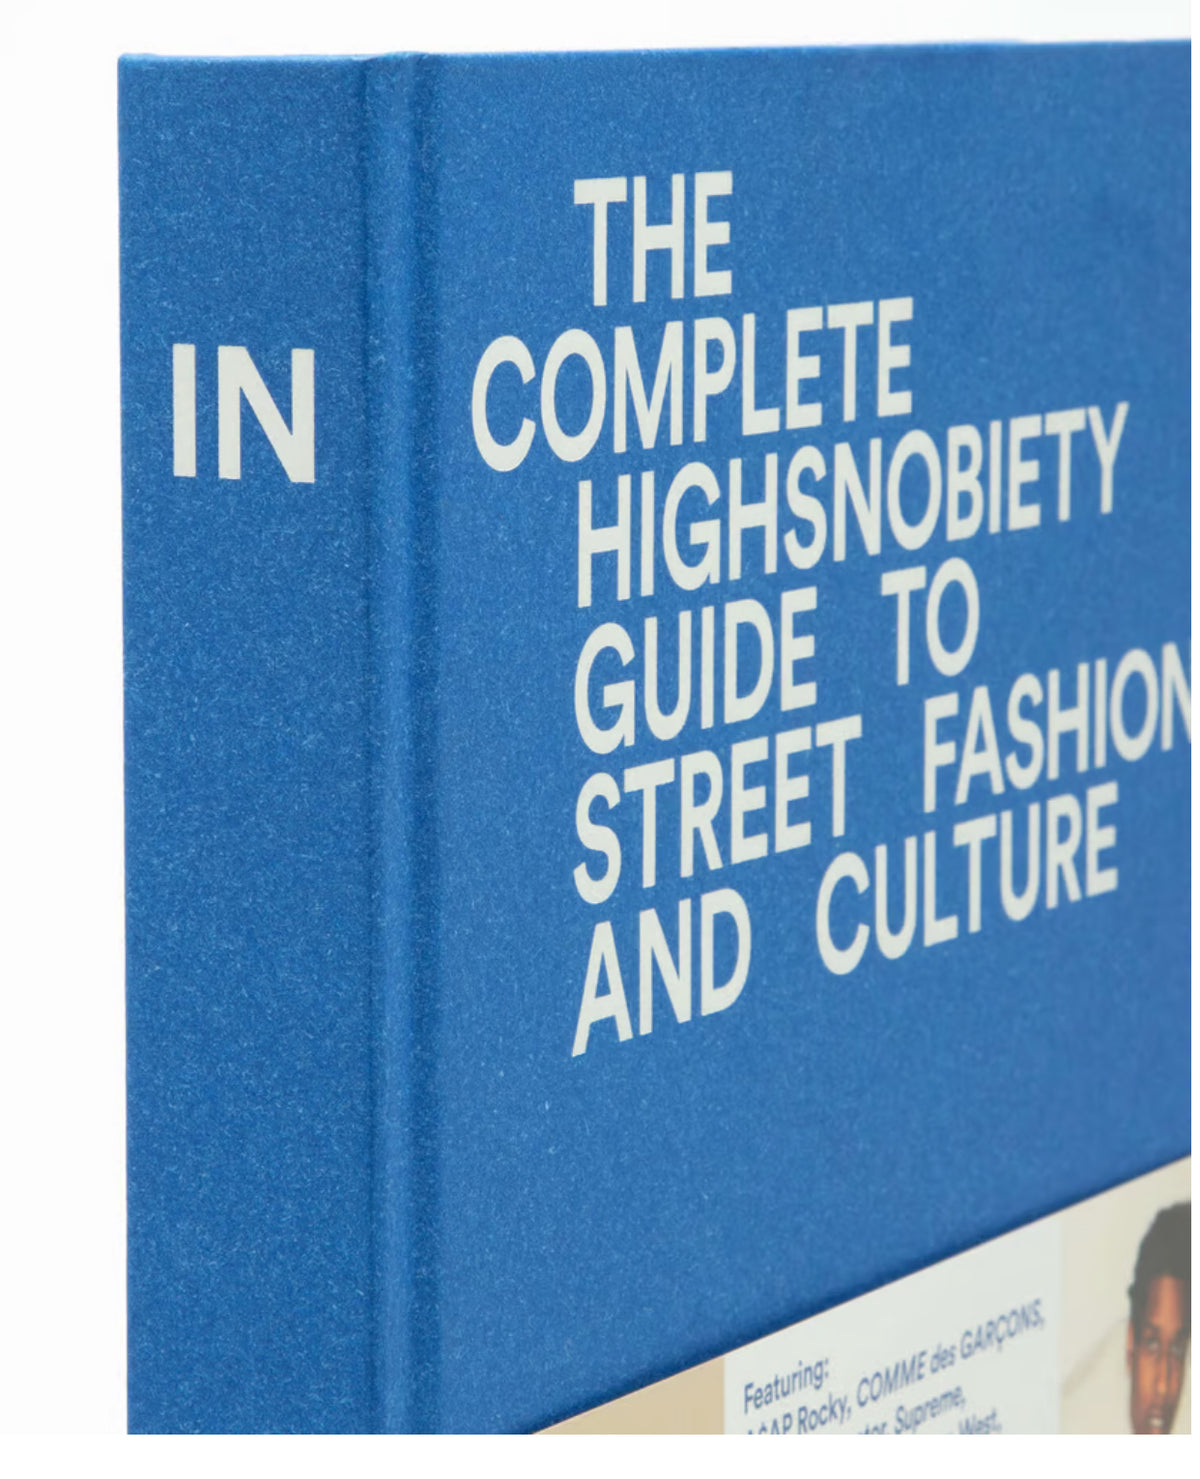 THE INCOMPLETE - HIGHSNOBIETY GUIDE TO STREET FASHION AND CULTURE